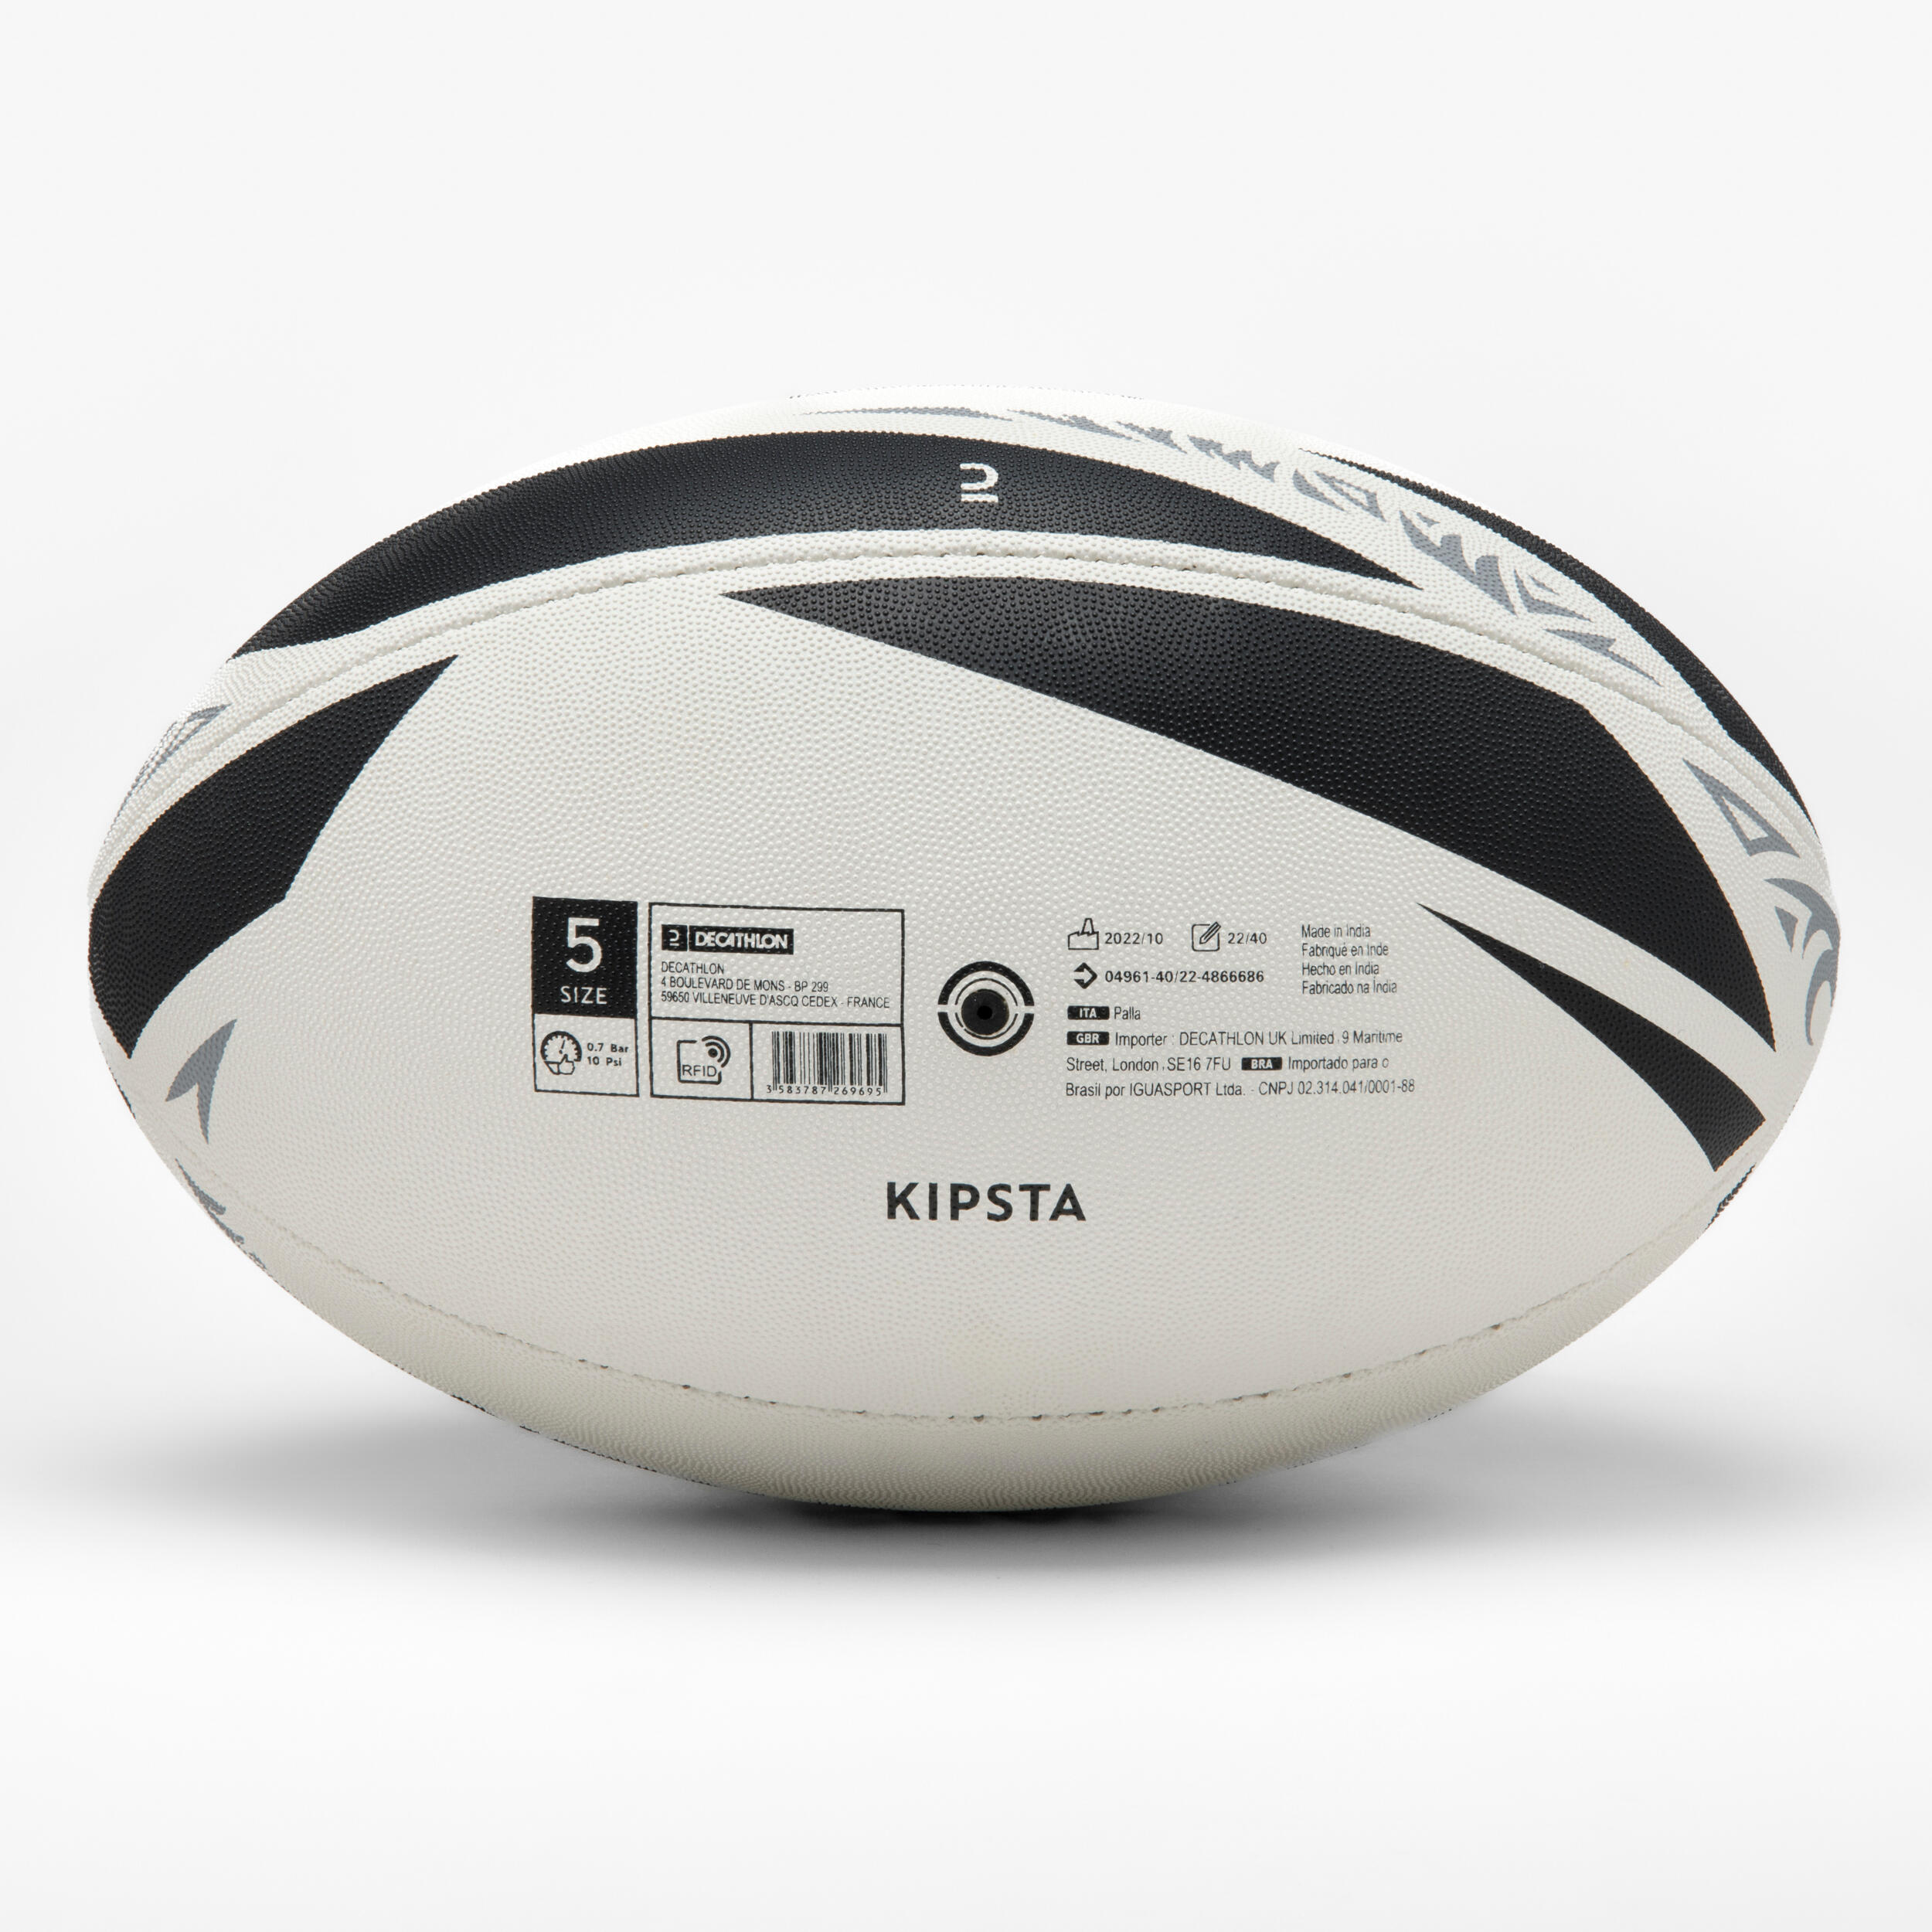 Rugby Ball Size 5 - New Zealand 2/6